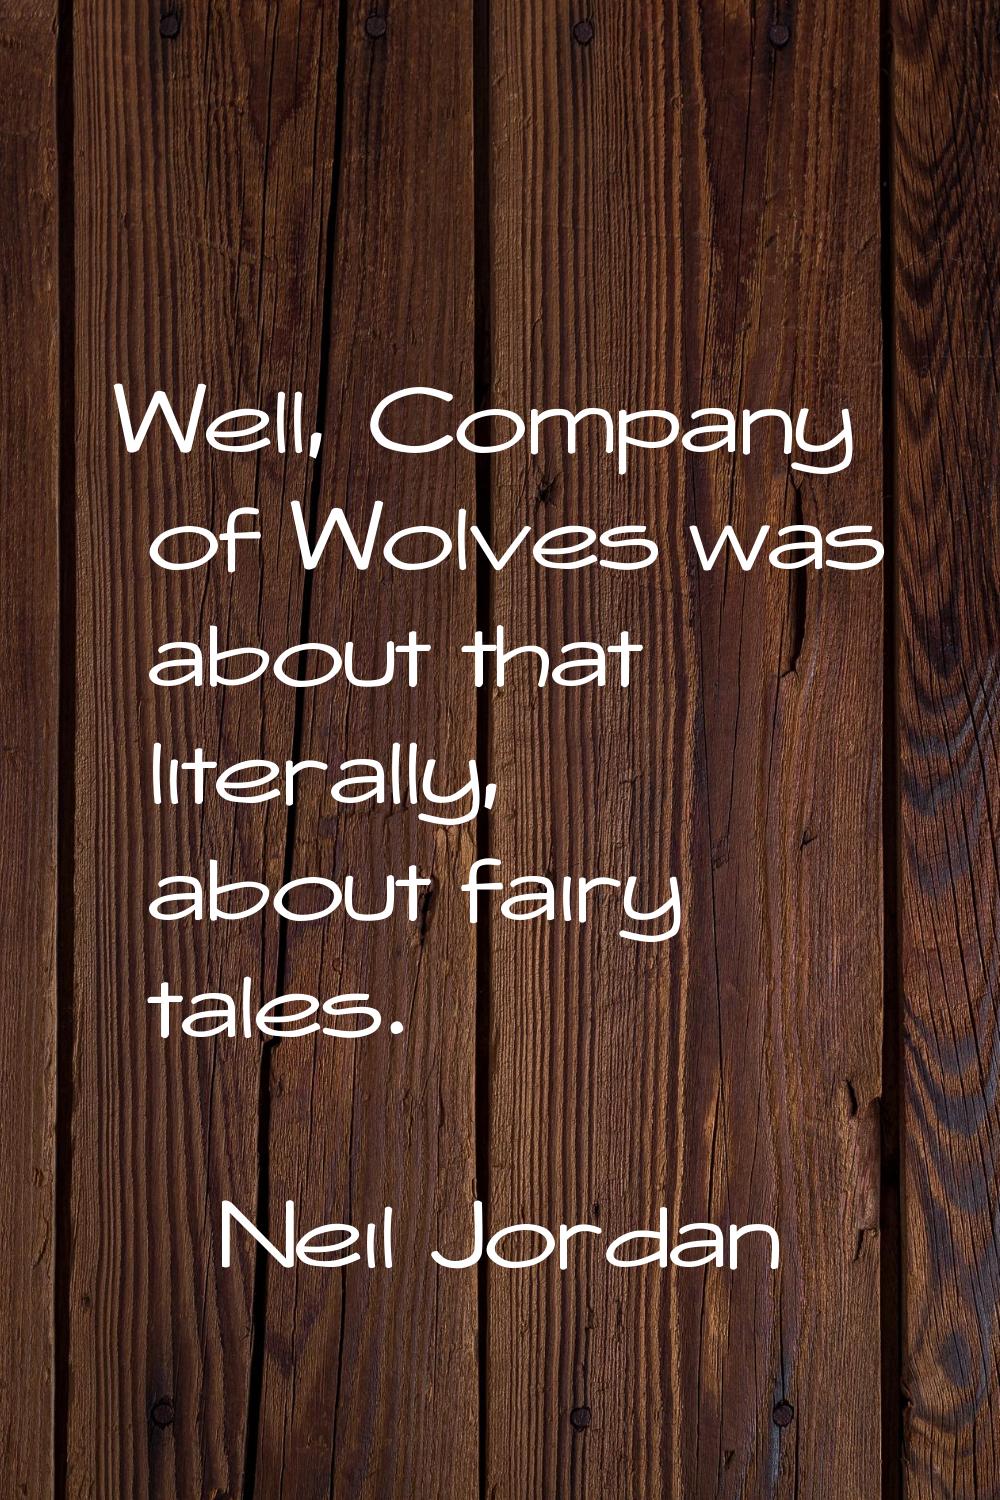 Well, Company of Wolves was about that literally, about fairy tales.